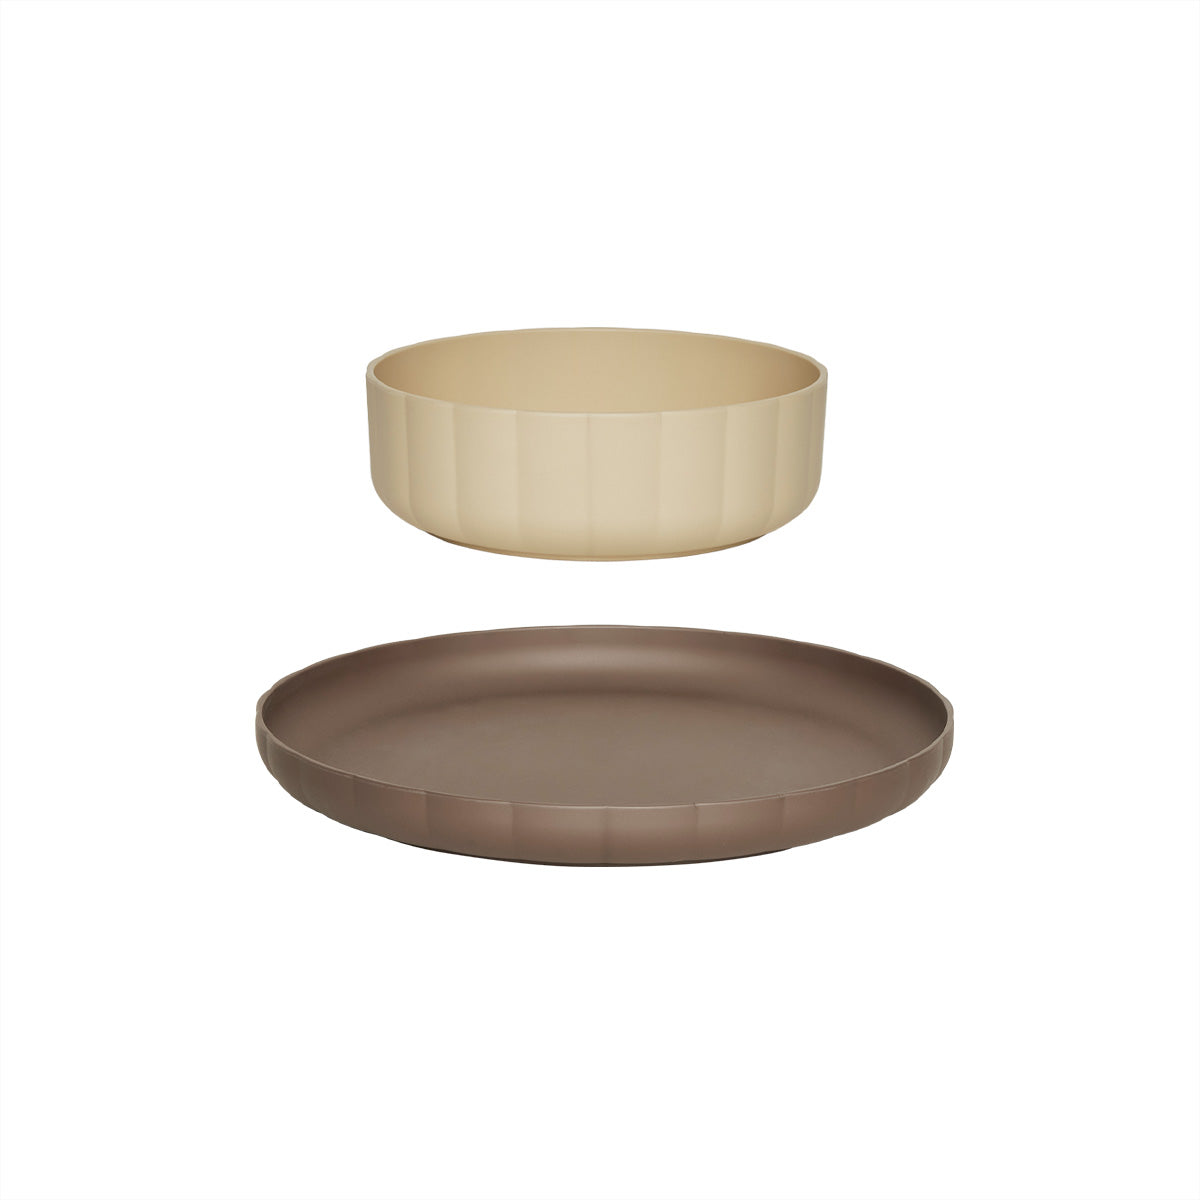 OYOY MINI Pullo Plate & Bowl - Set of 2 Dining Ware